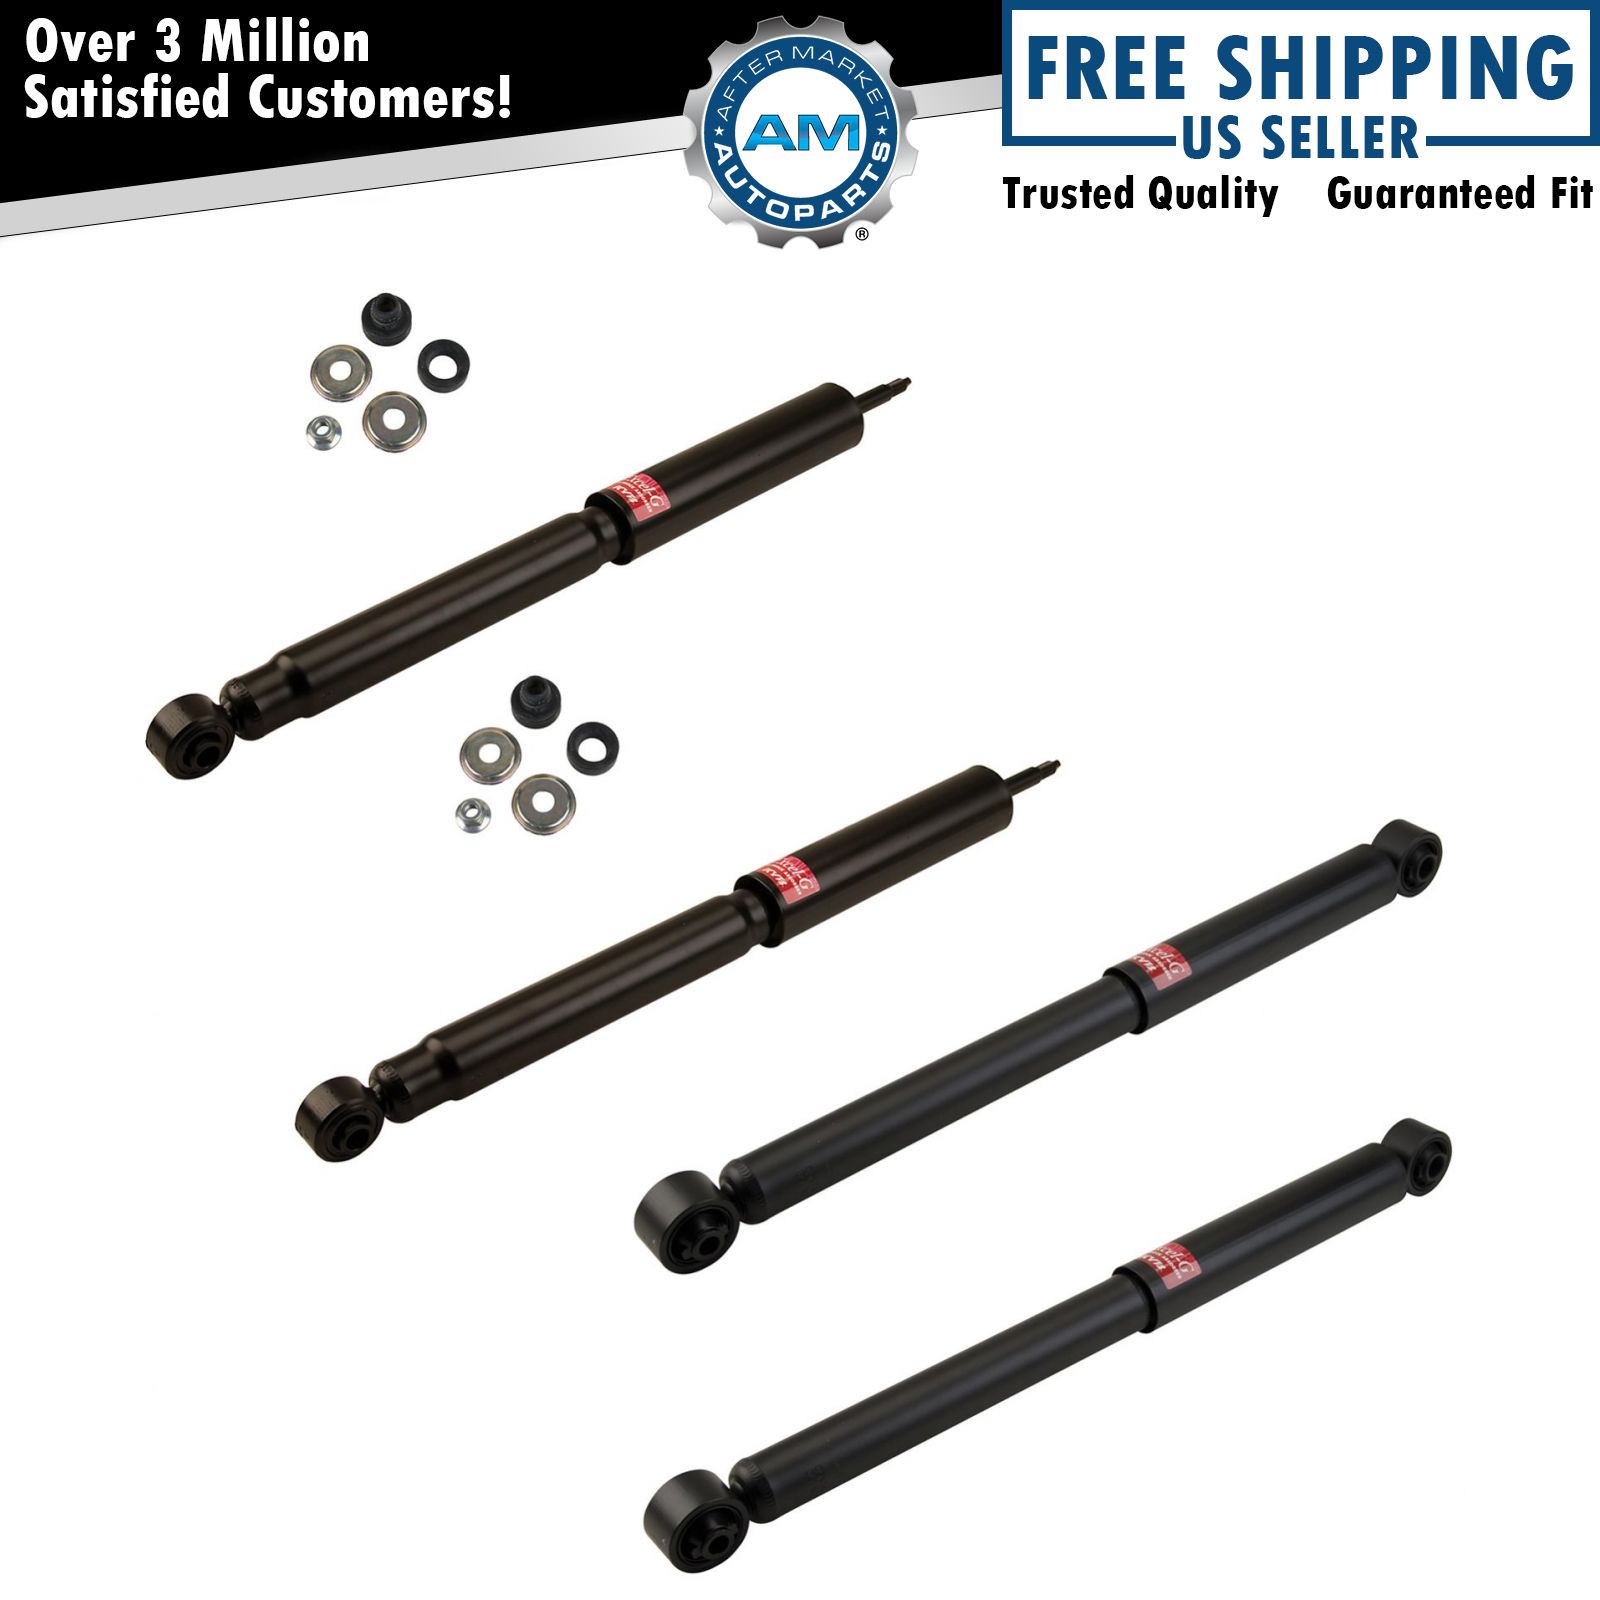 Front and Rear Shock Set For 1994-2002 Dodge Ram 2500 Ram 3500